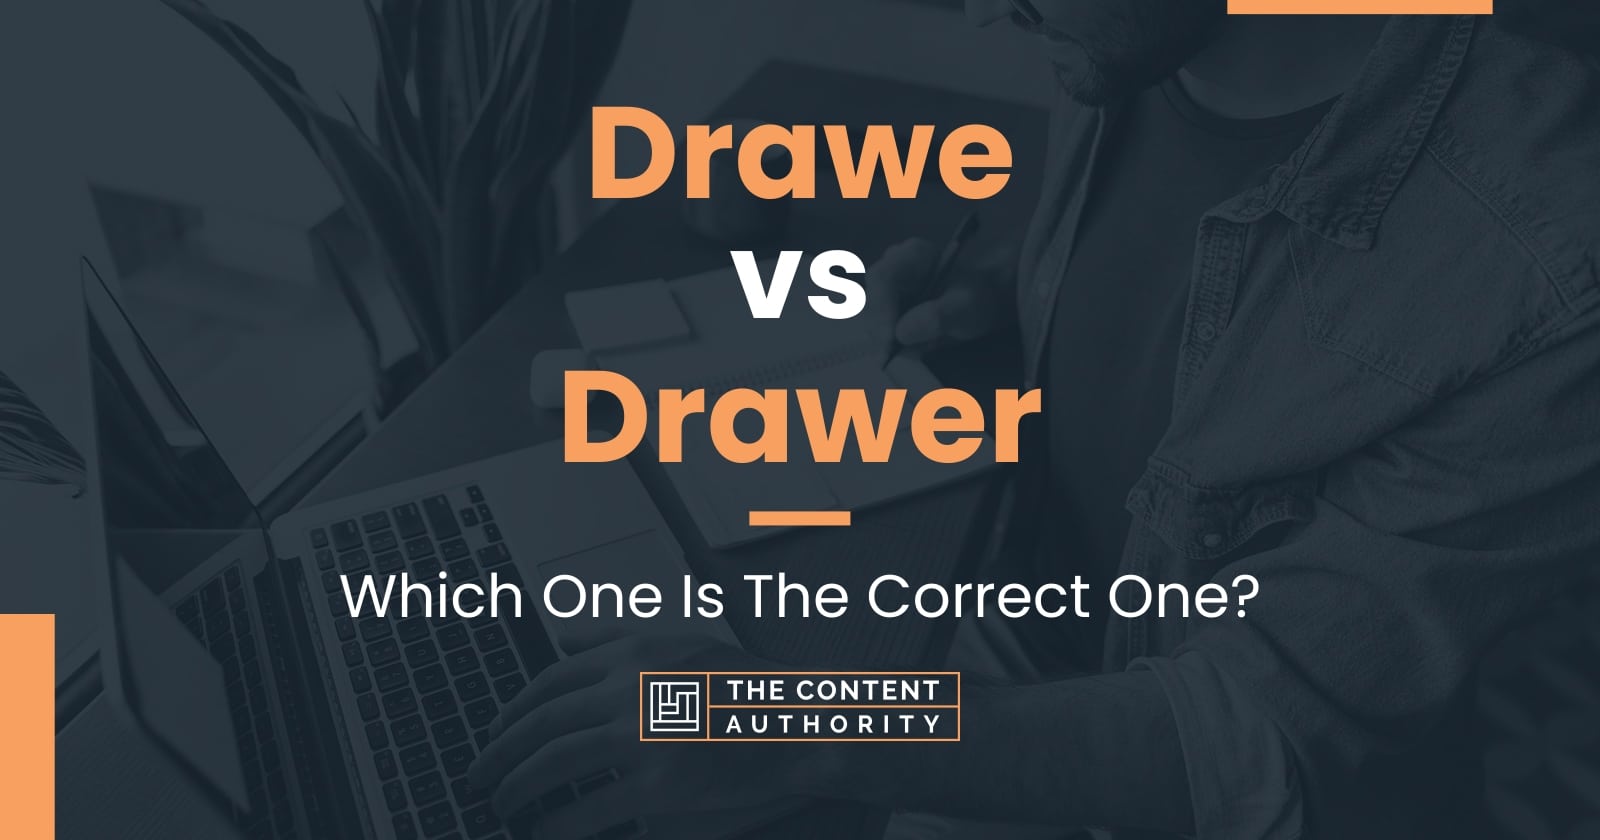 Drawe vs Drawer Which One Is The Correct One?